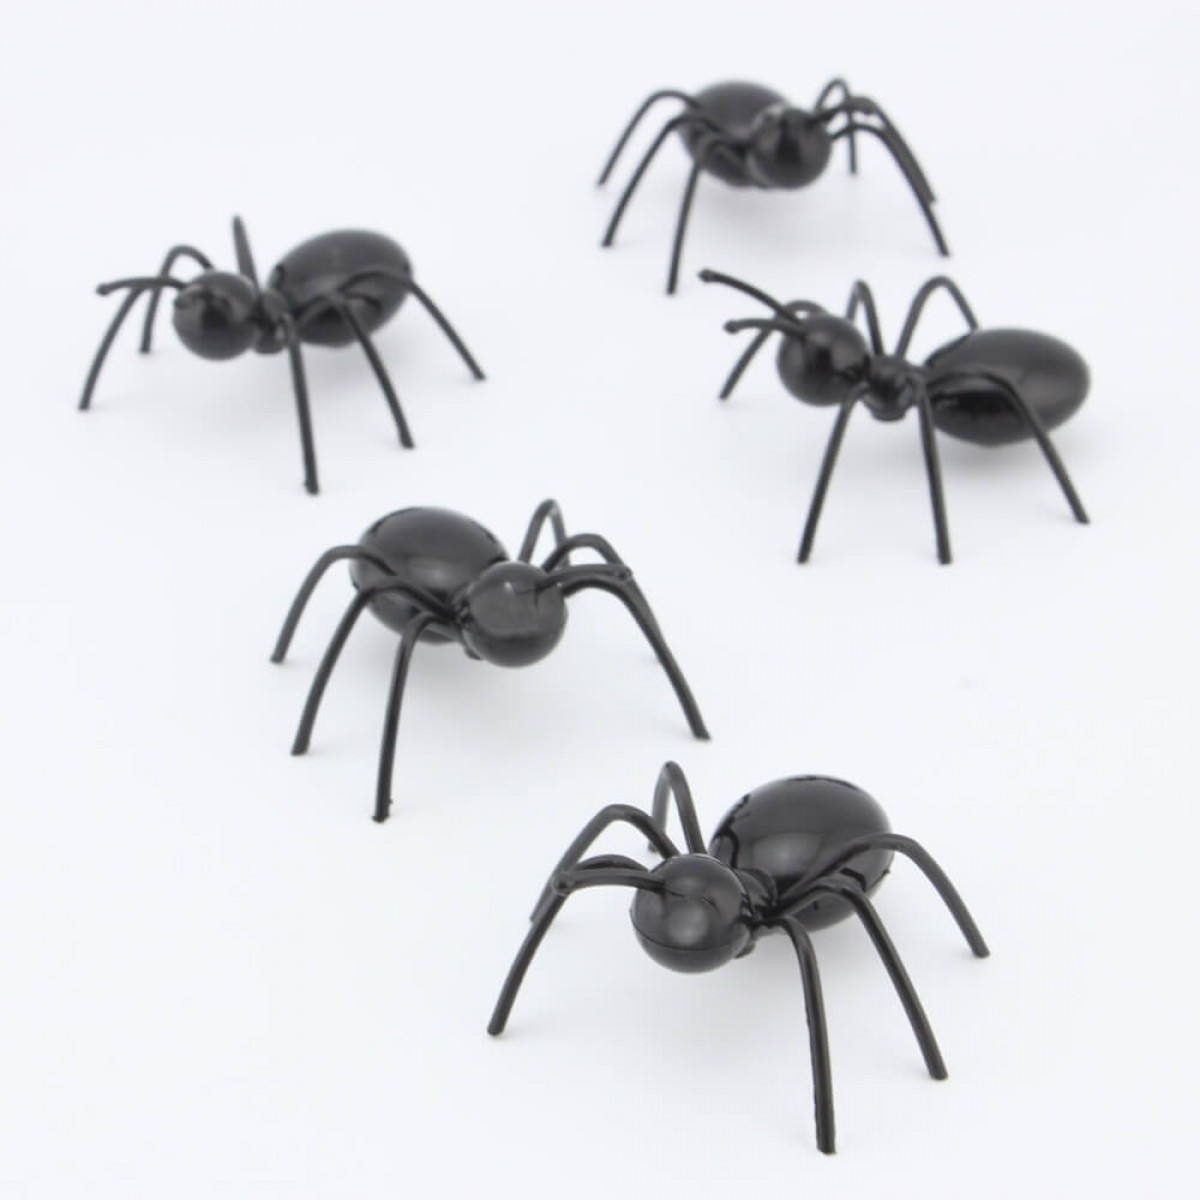 3D Ants Refrigerator Magnets for Kids - Set of 8 Decorative Cute Ant ...